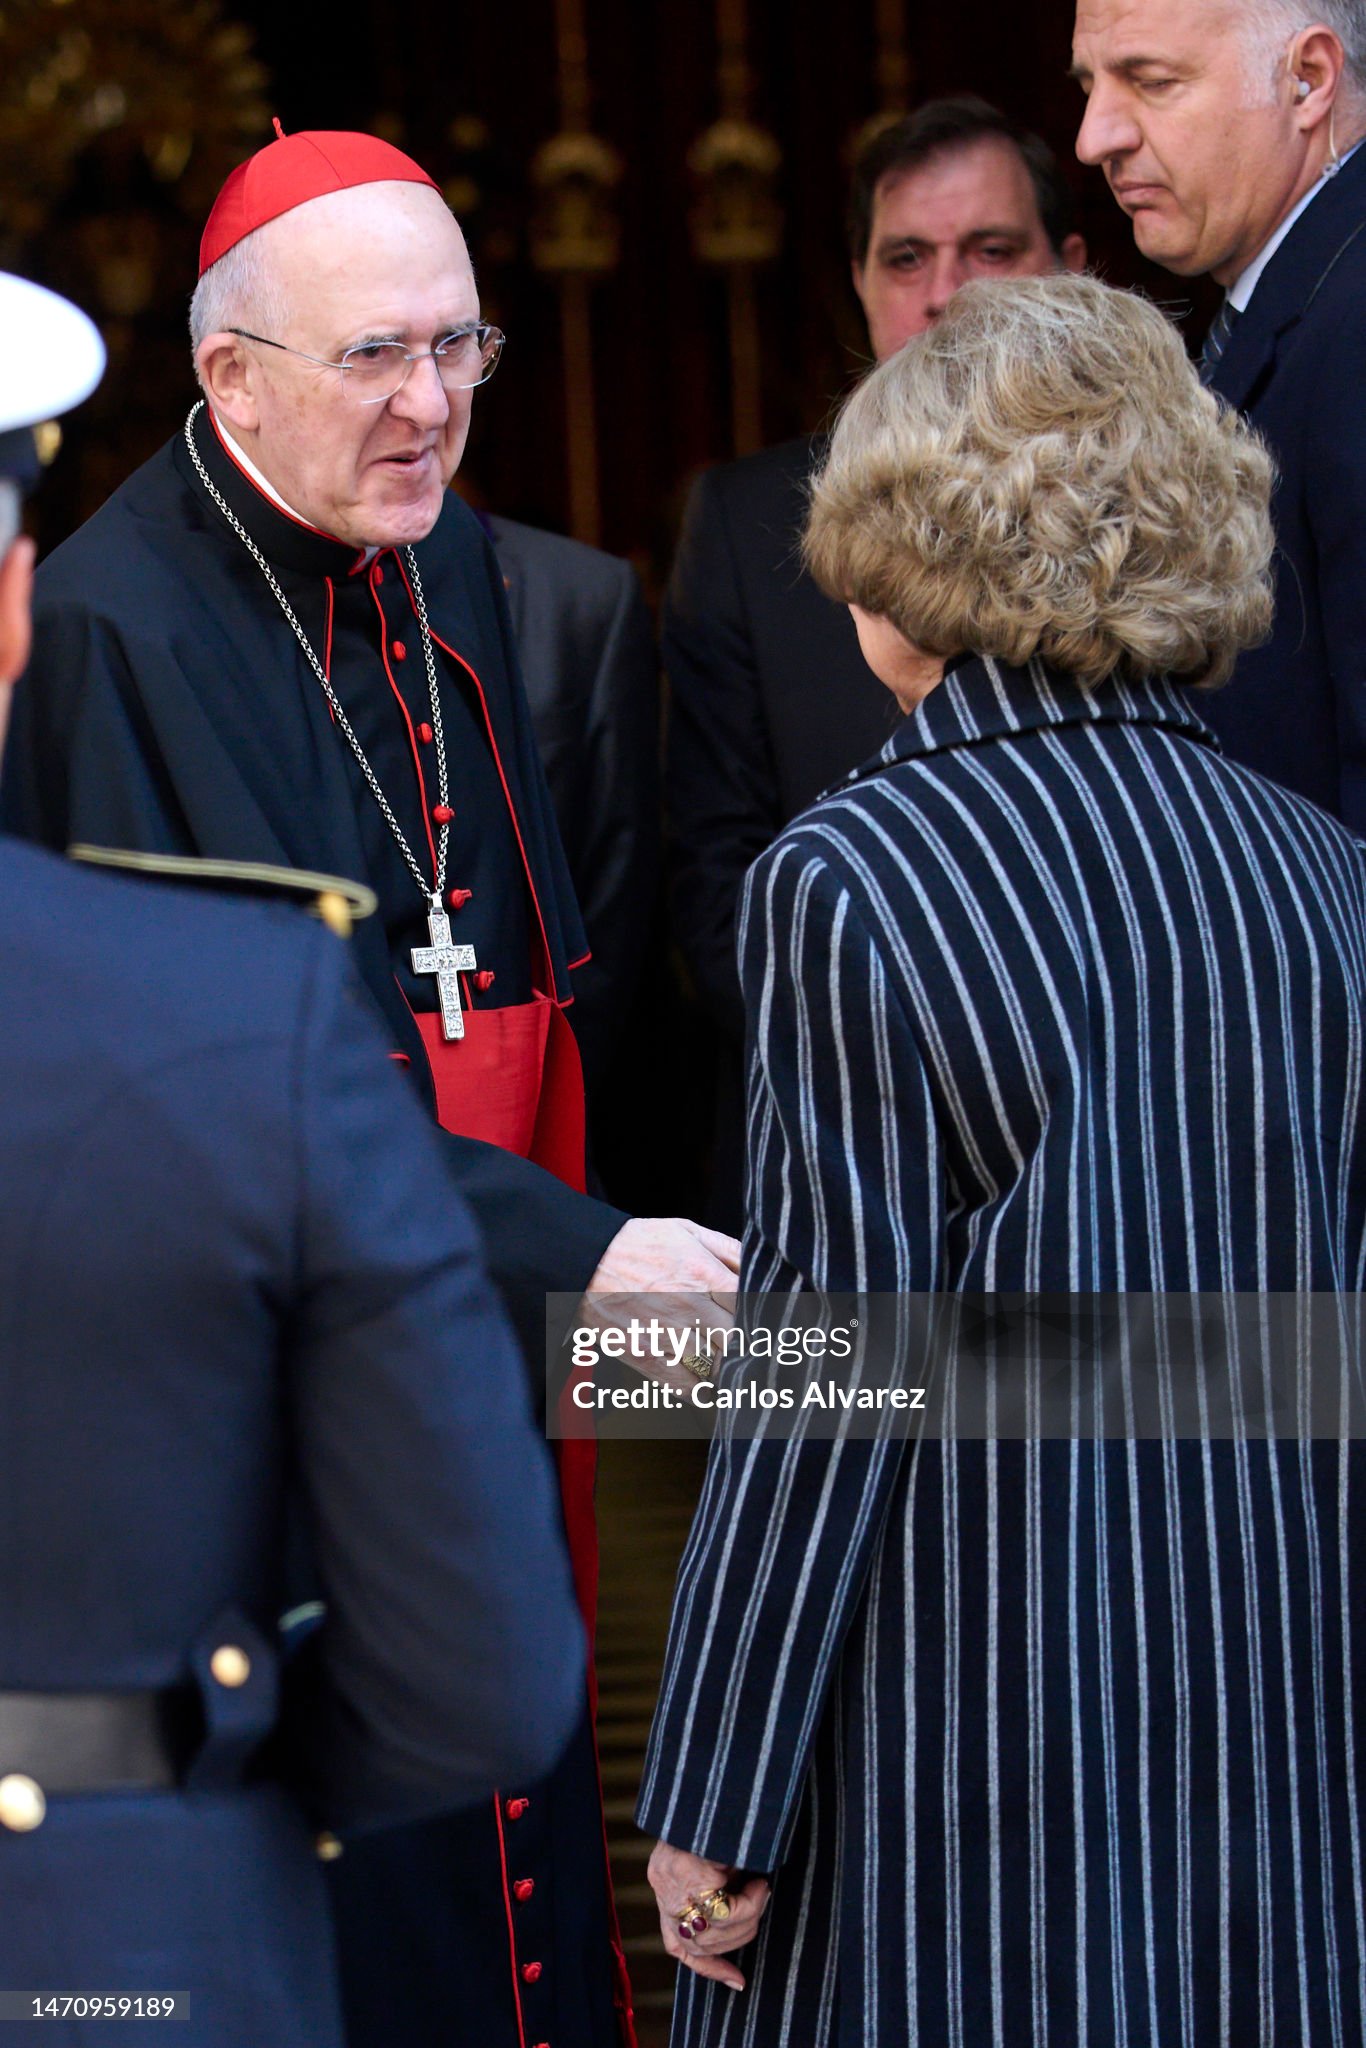 queen-sofia-greets-the-archbishop-of-madrid-carlos-osoro-during-the-traditional-thanksgiving.jpg